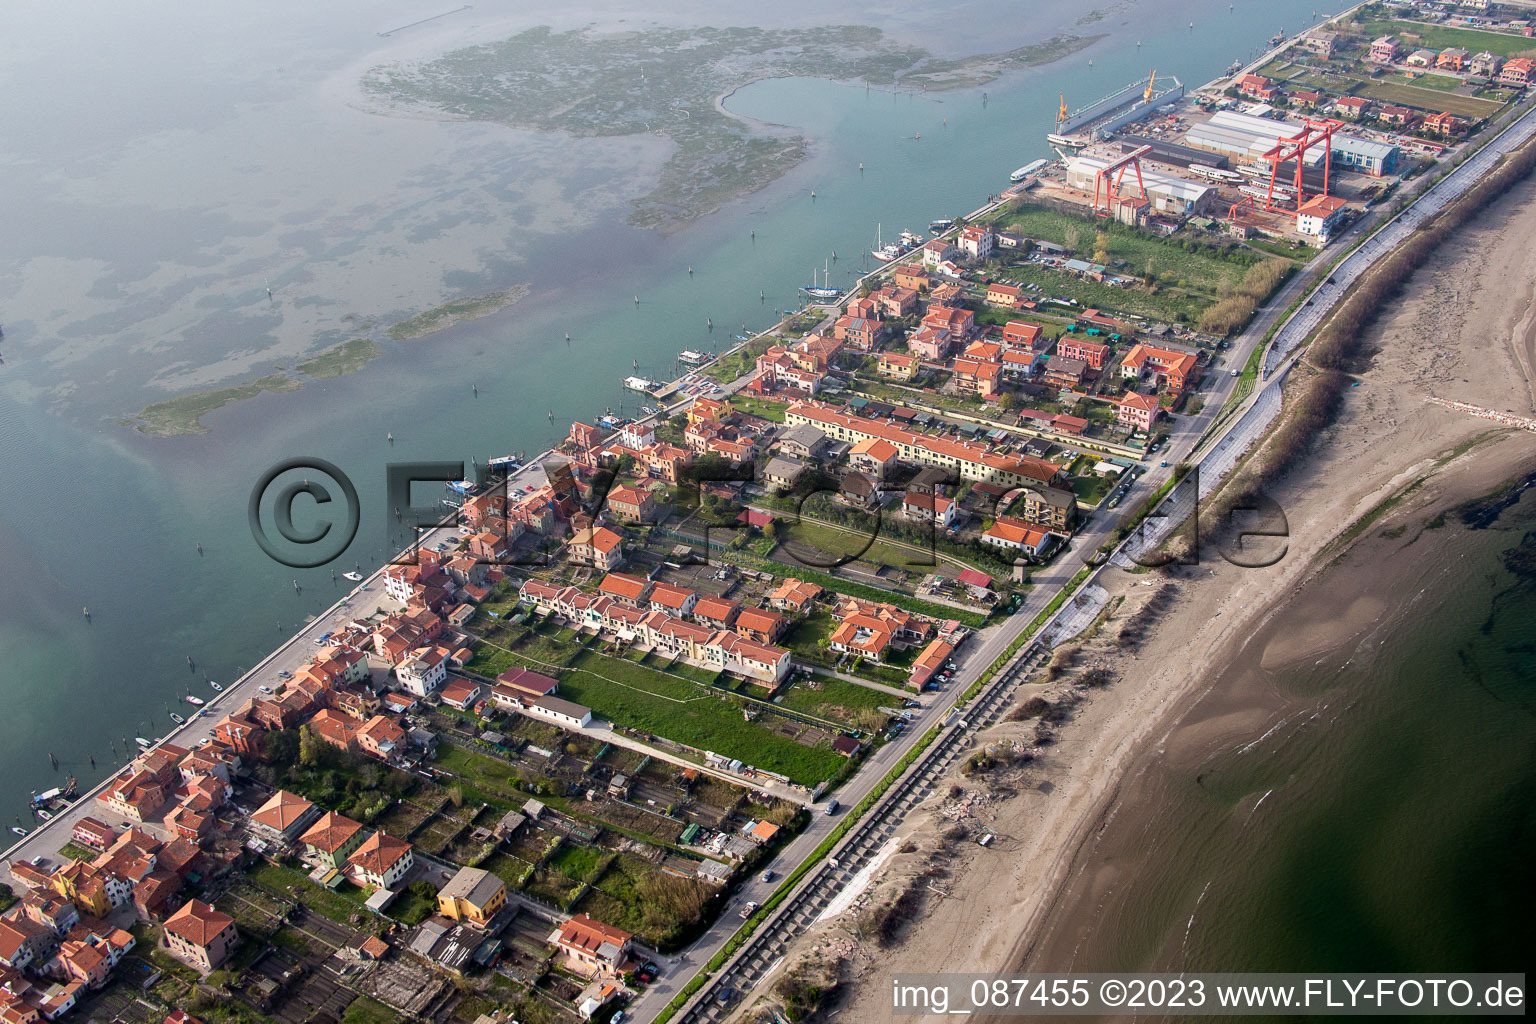 Aerial view of Sant'Antonio in the state Veneto, Italy